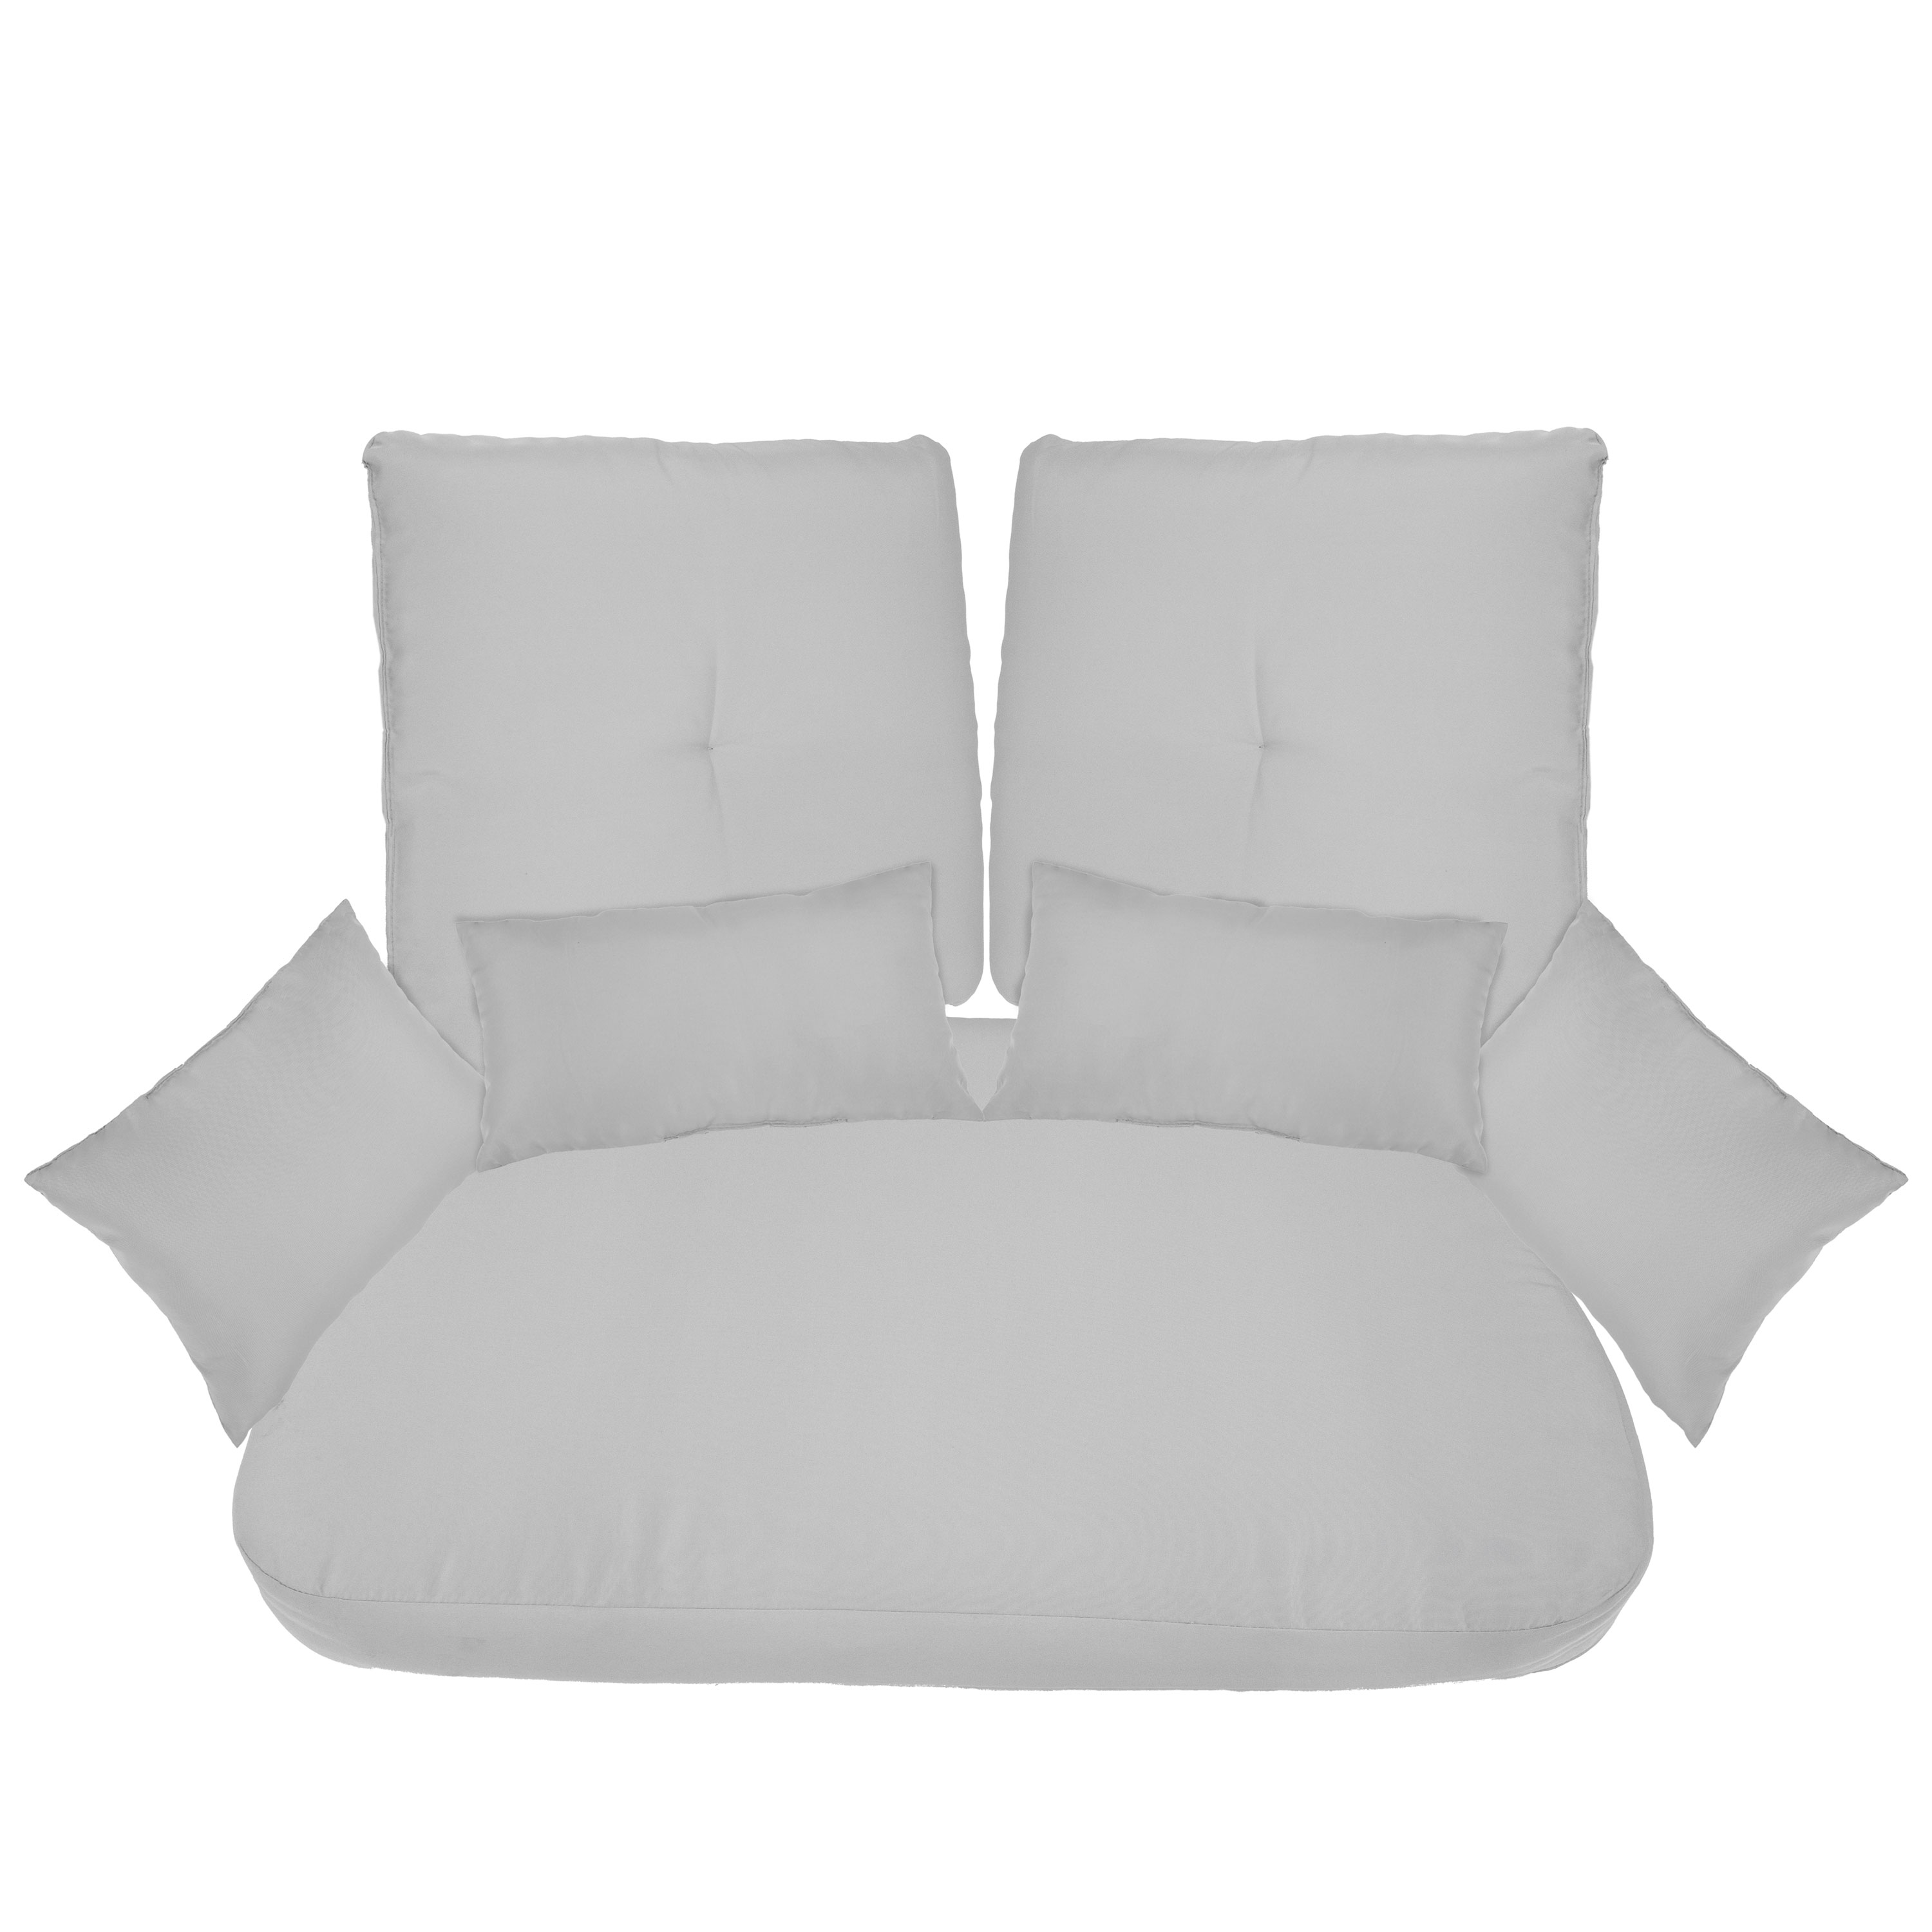 Double Egg Chair Glider Cushion Set with Pillows - Gray